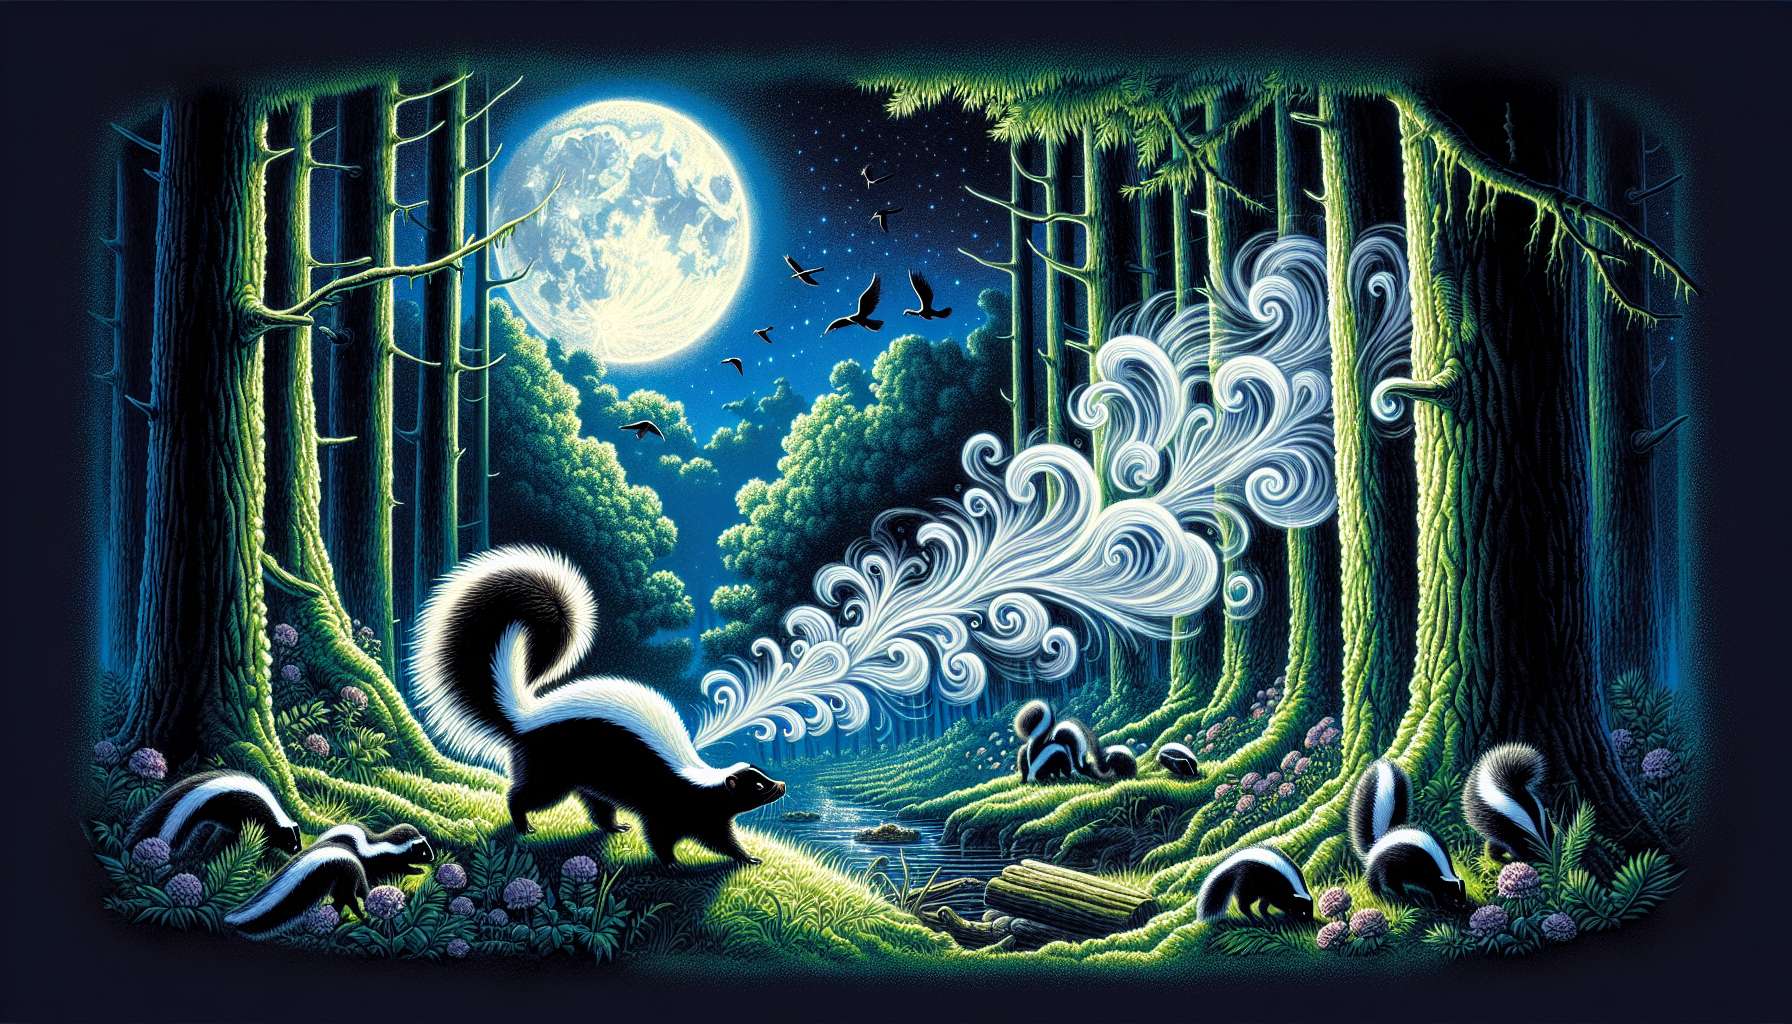 Illustration of a skunk spraying with a strong scent